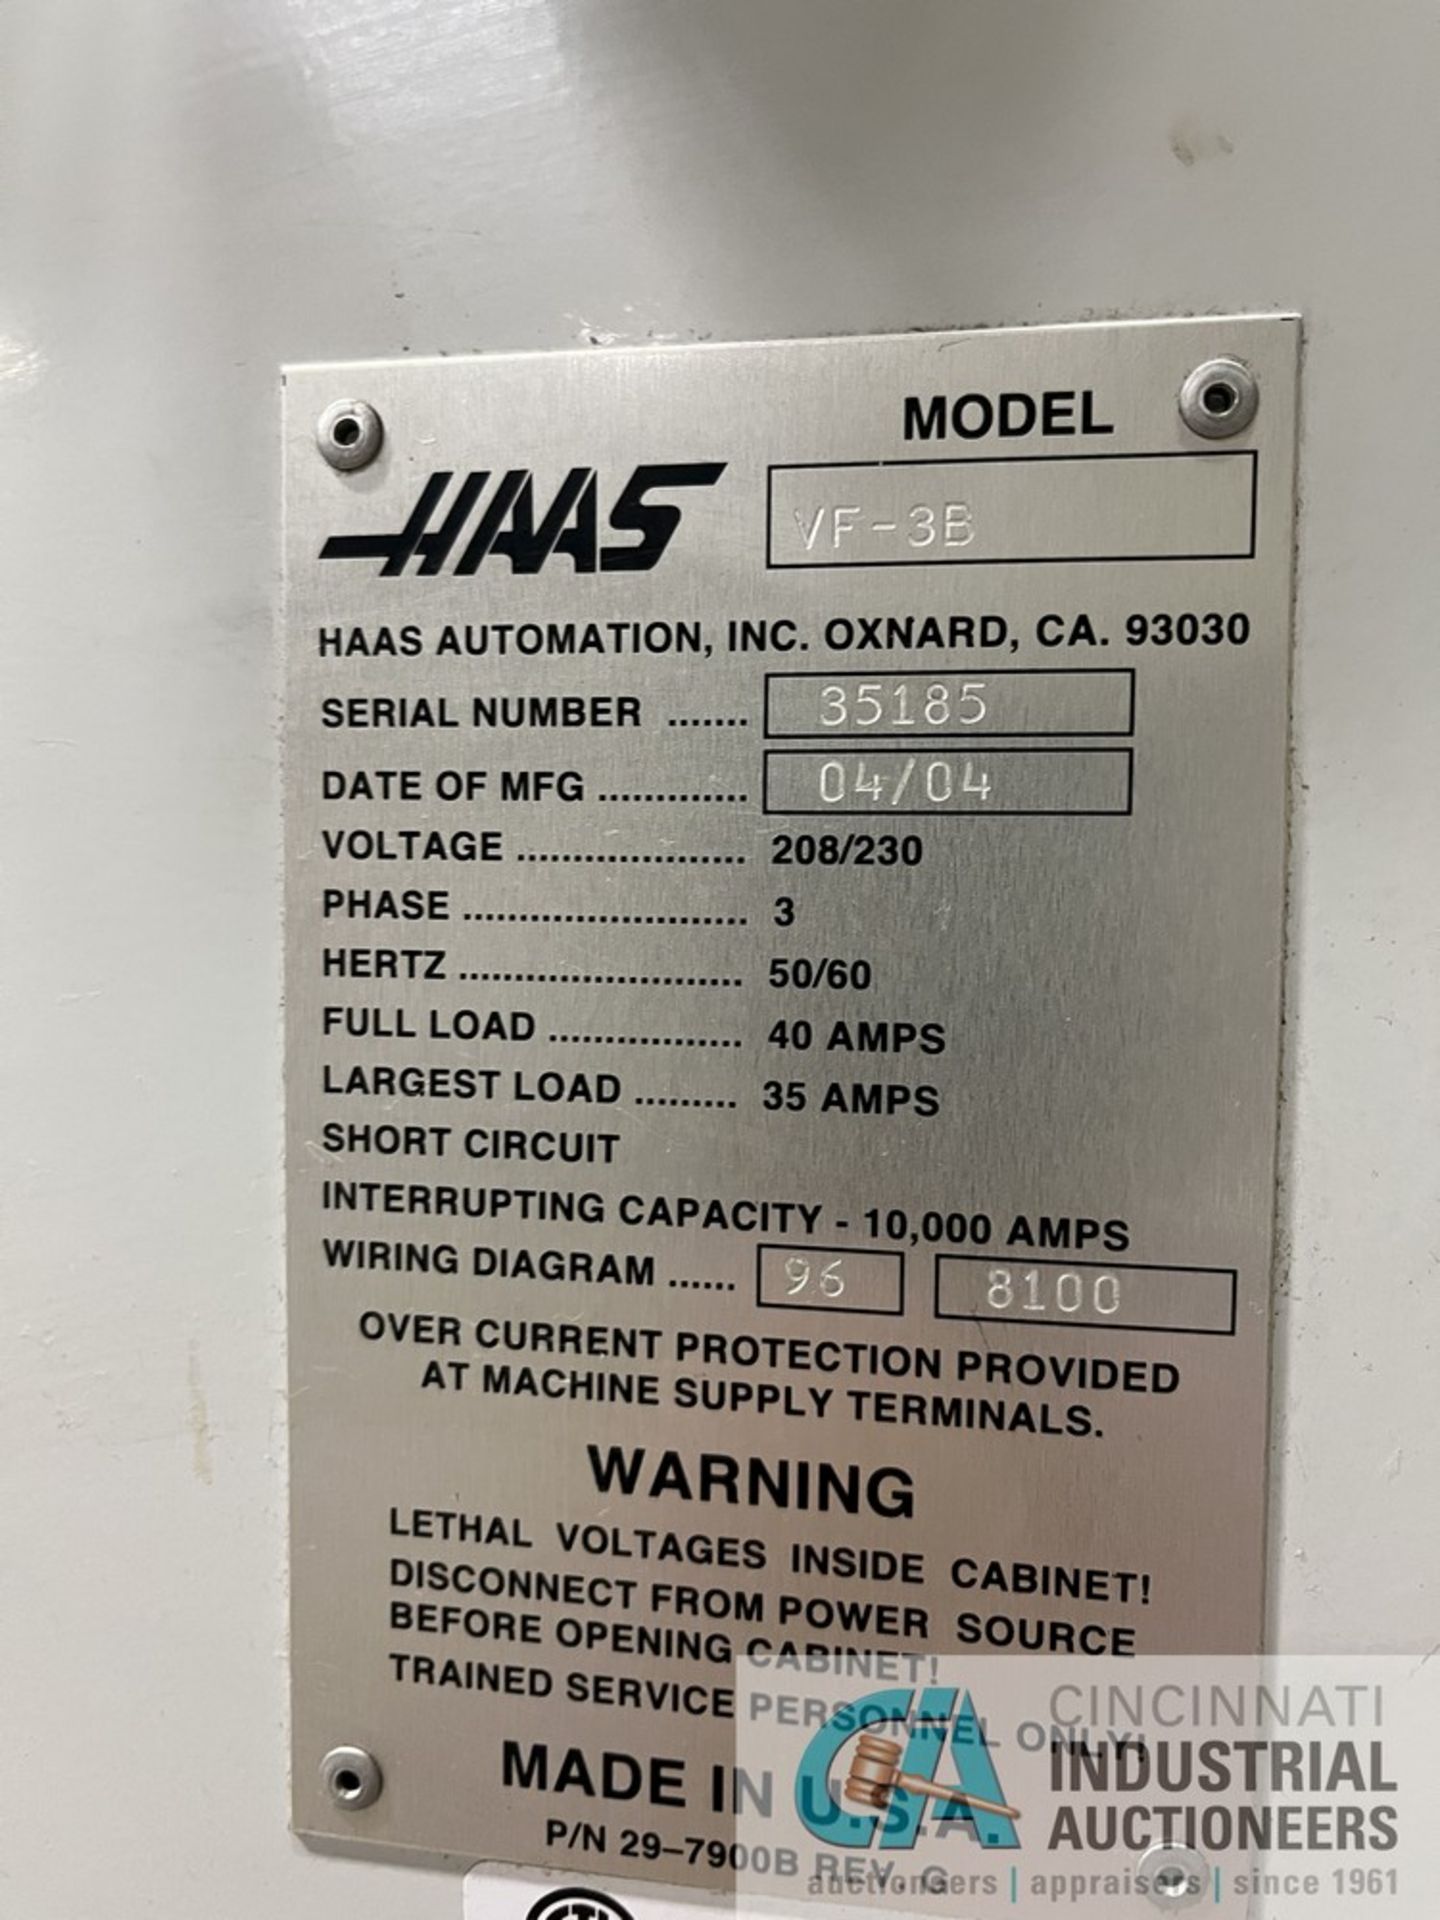 HAAS MODEL VF-3 CNC VERTICAL MACHINING CENTER VOP-D; S/N 35185 (NEW 4/2004), TABLE SIZE 18" X 48", - Image 11 of 11